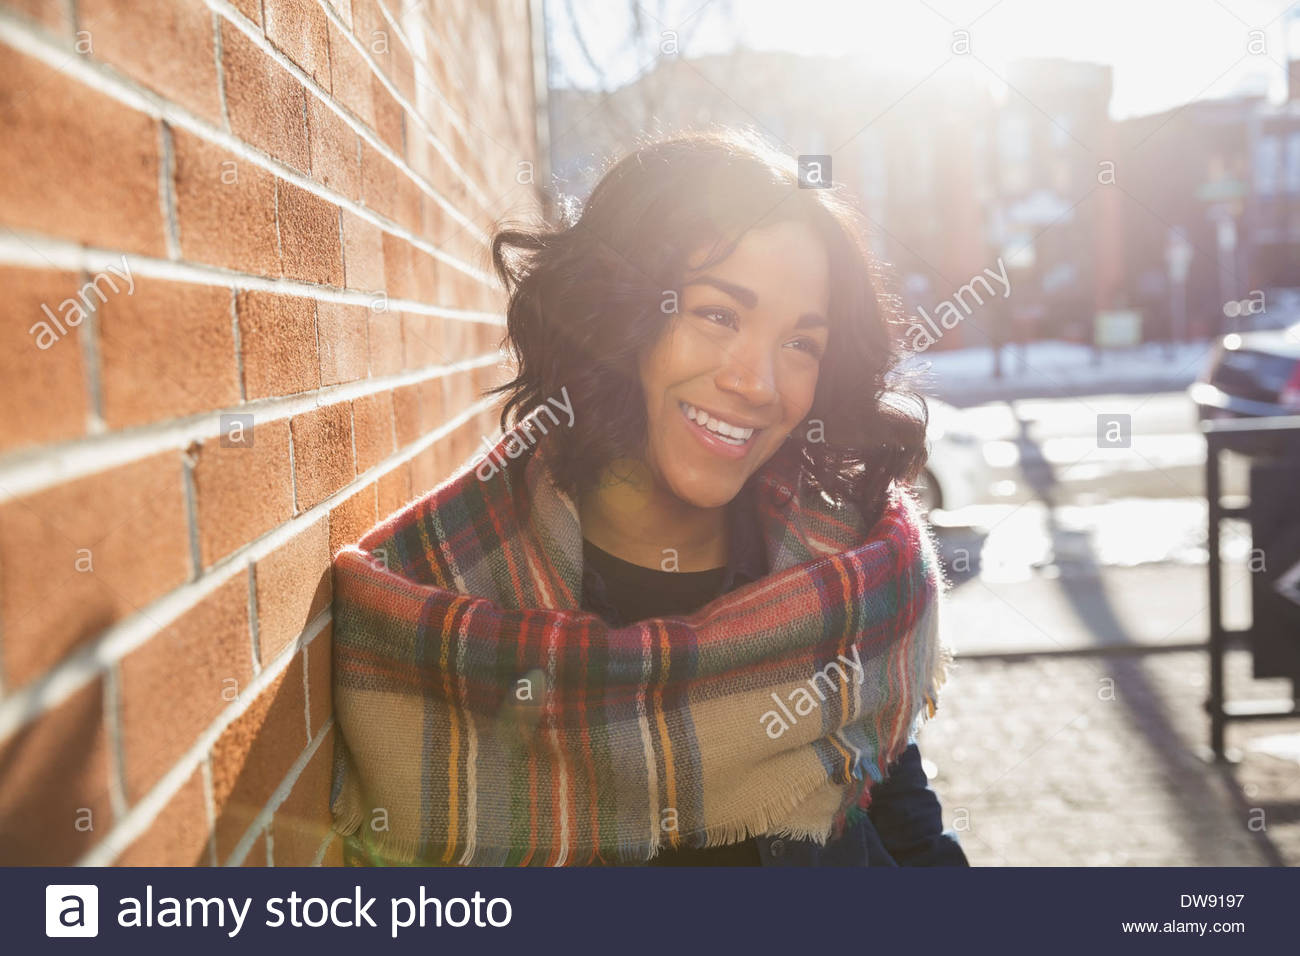 Smiling woman standing by brick wall Stock Photo